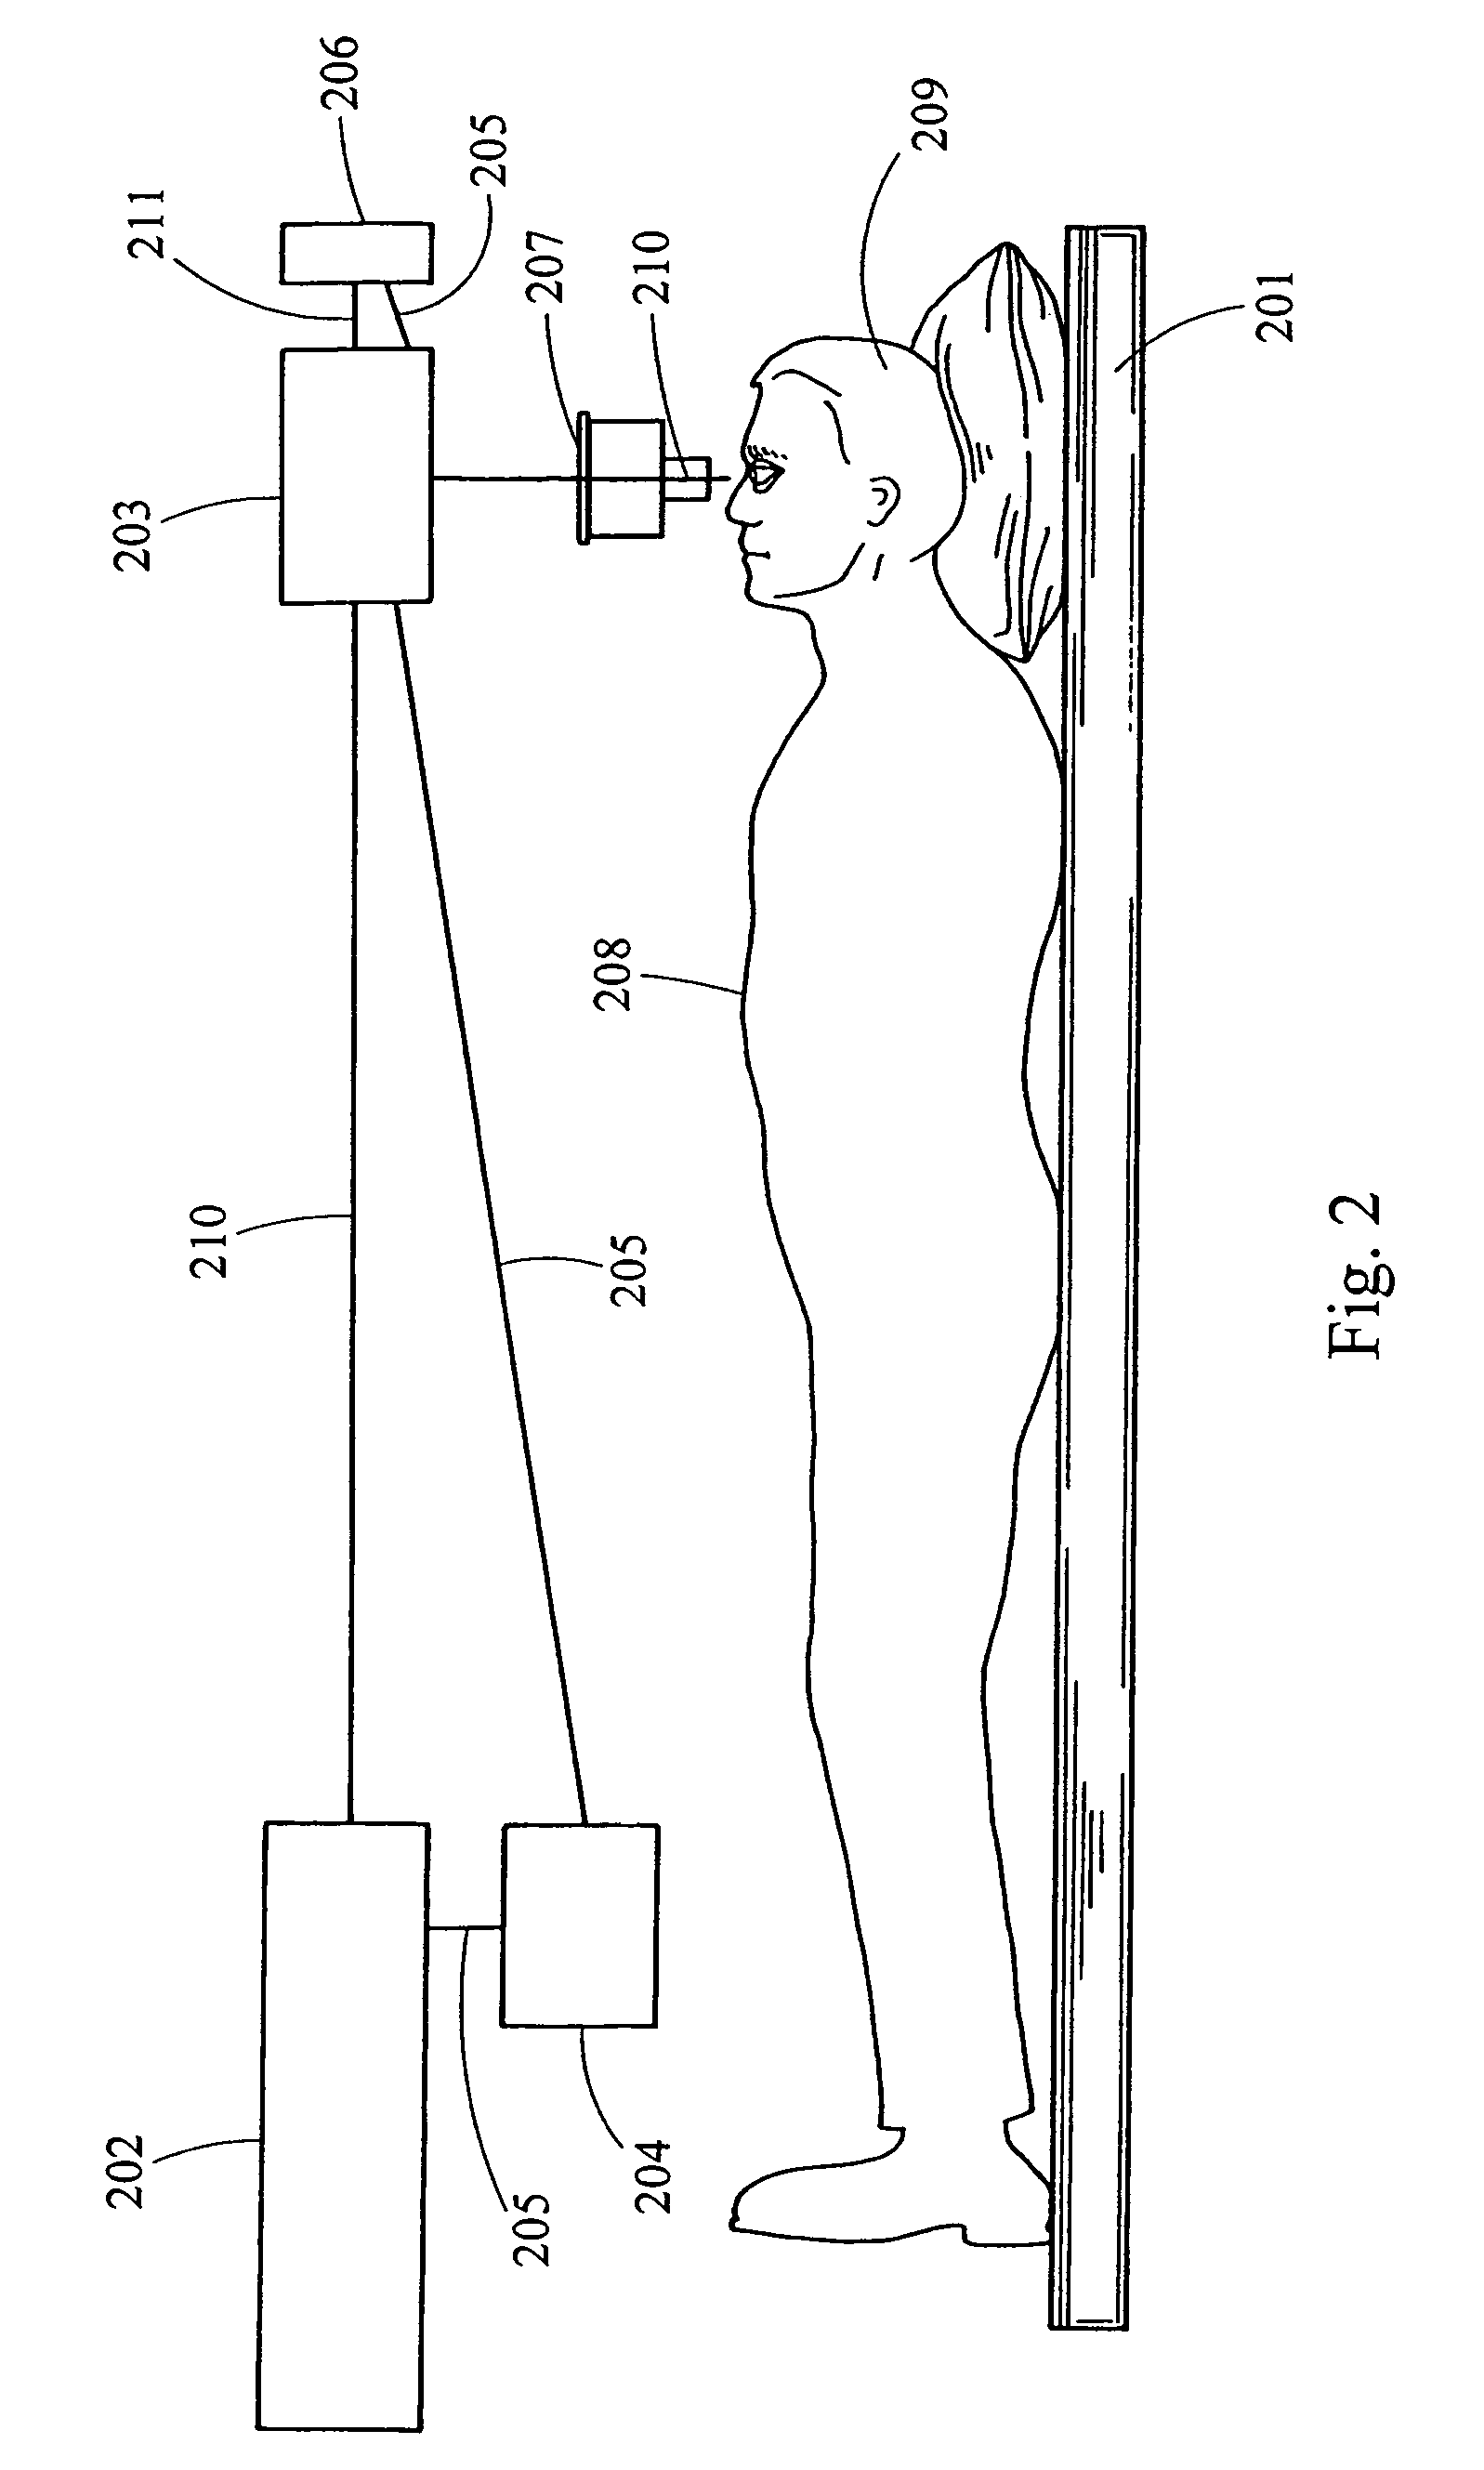 System and apparatus for treating the lens of an eye